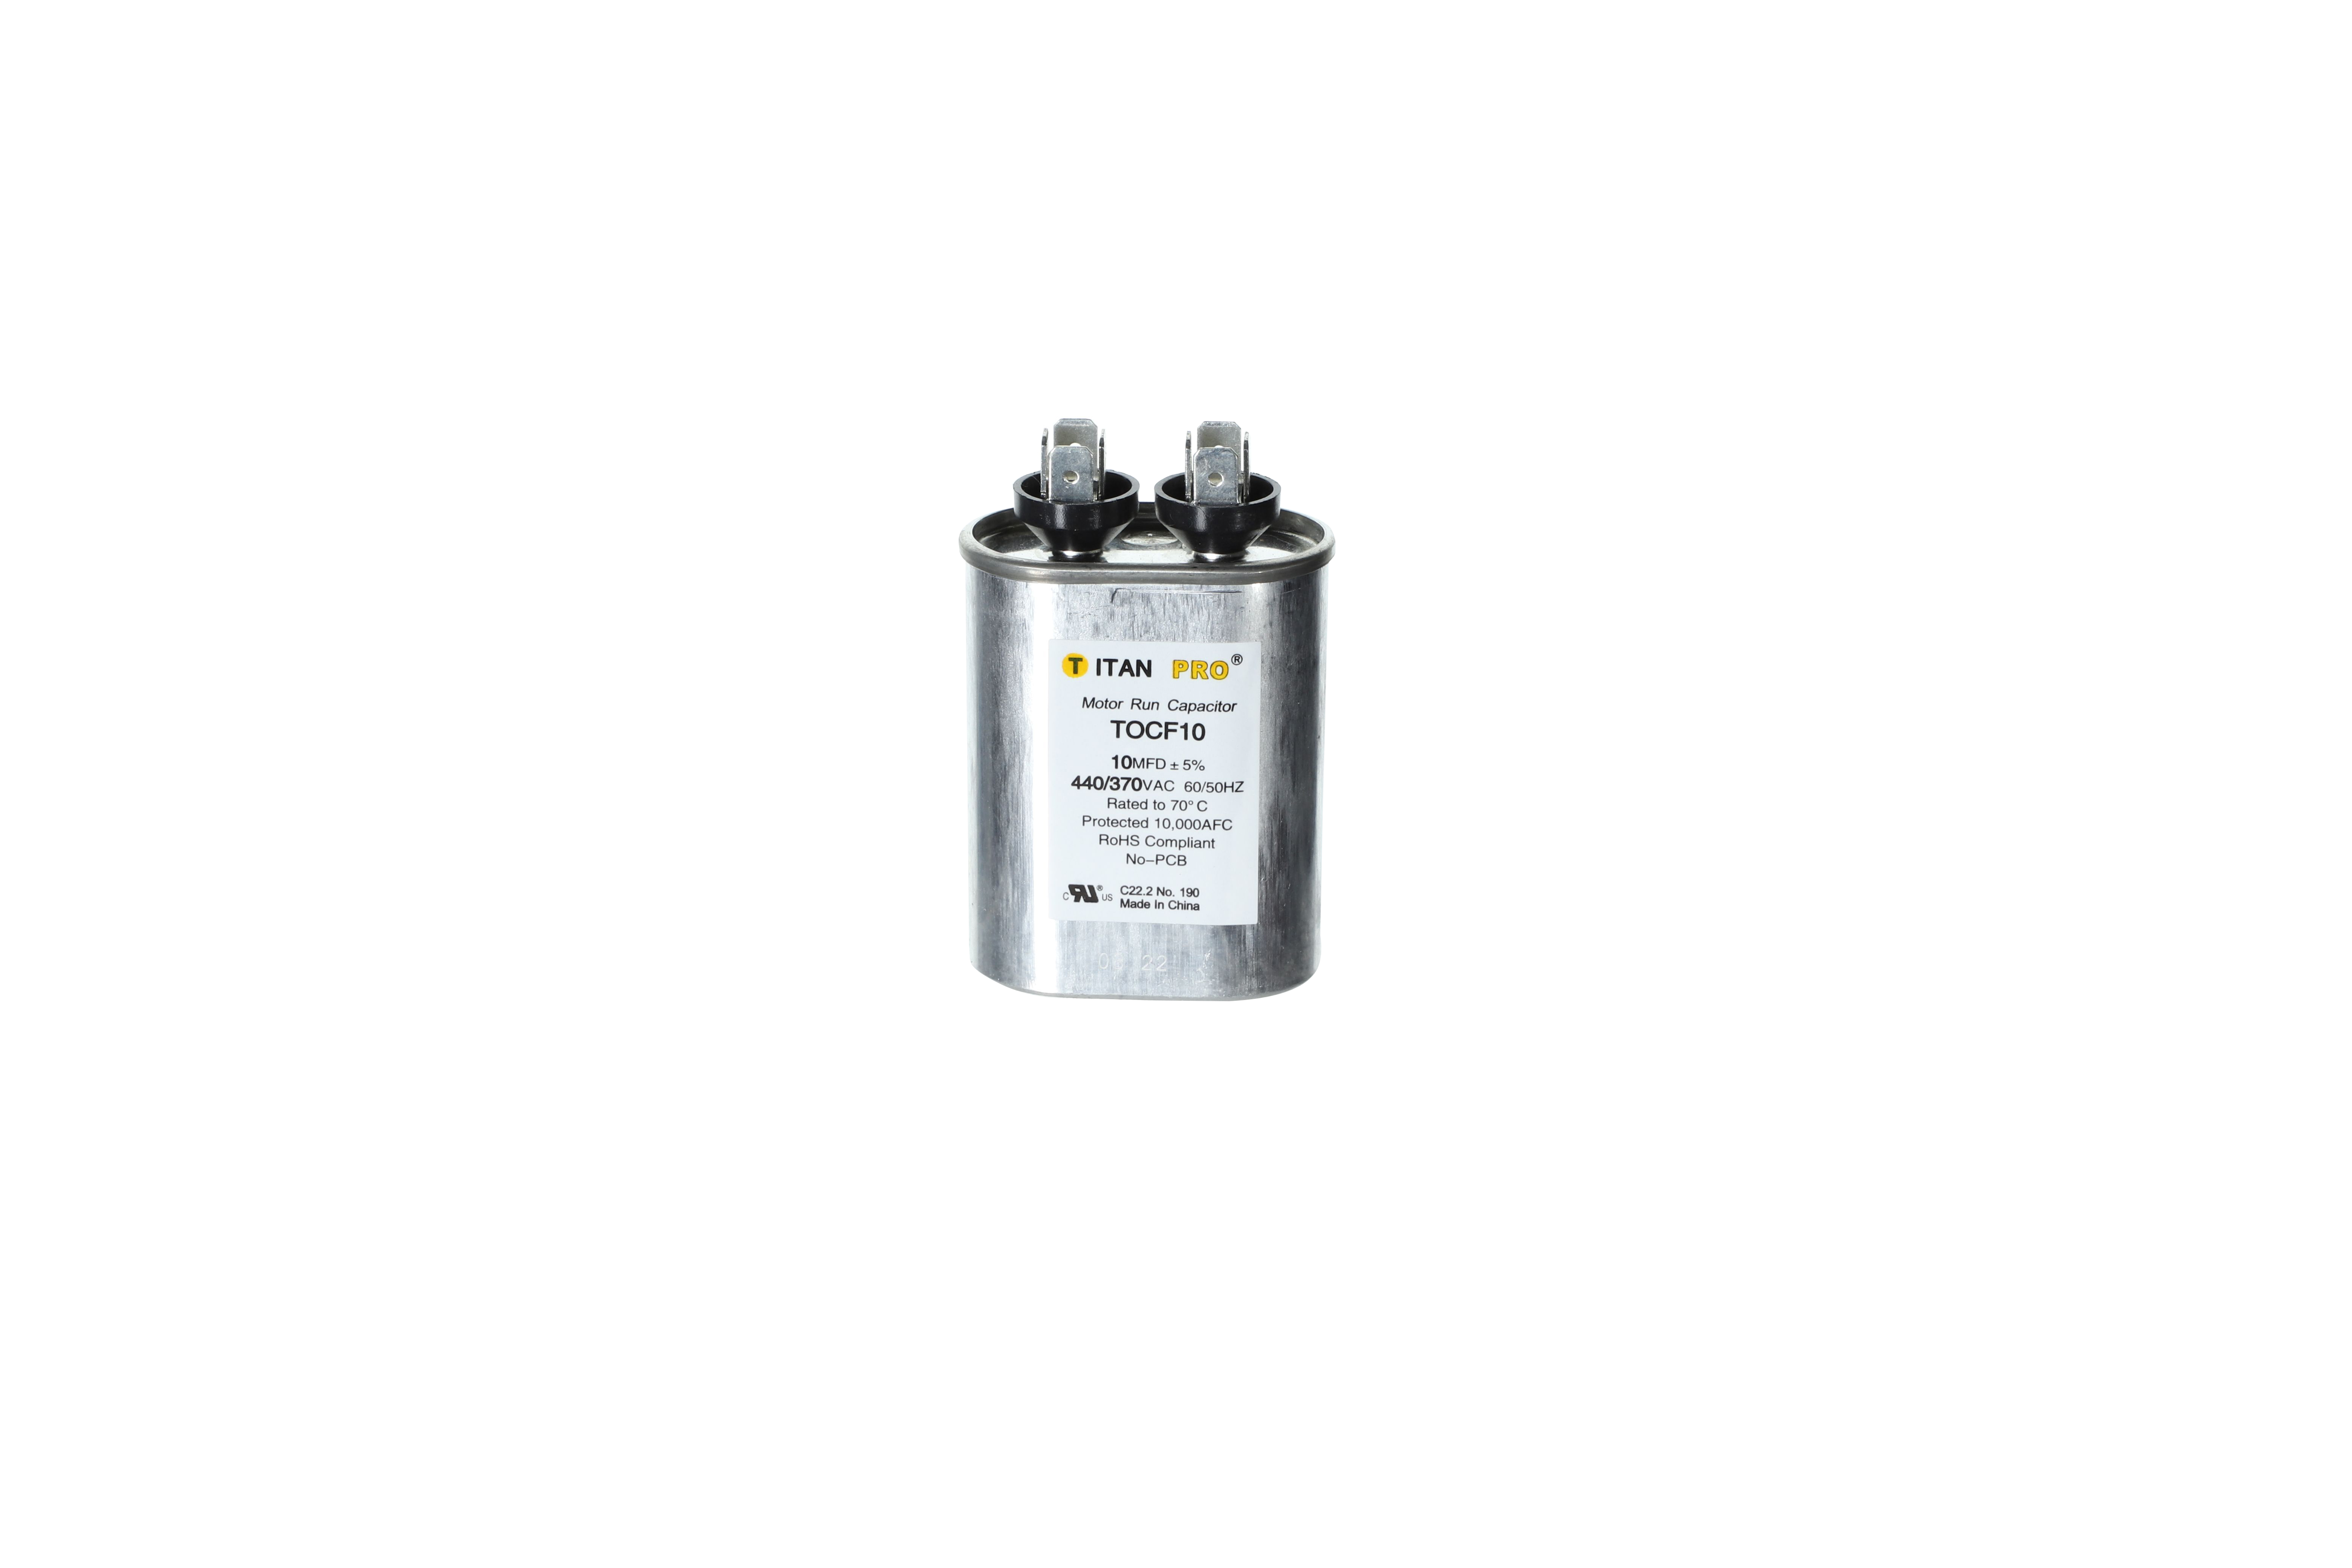 Packard Titan Pro™ TOCF7.5 Single Section Motor Run Capacitor, 7.5 uF, 440/370 VAC, Oval